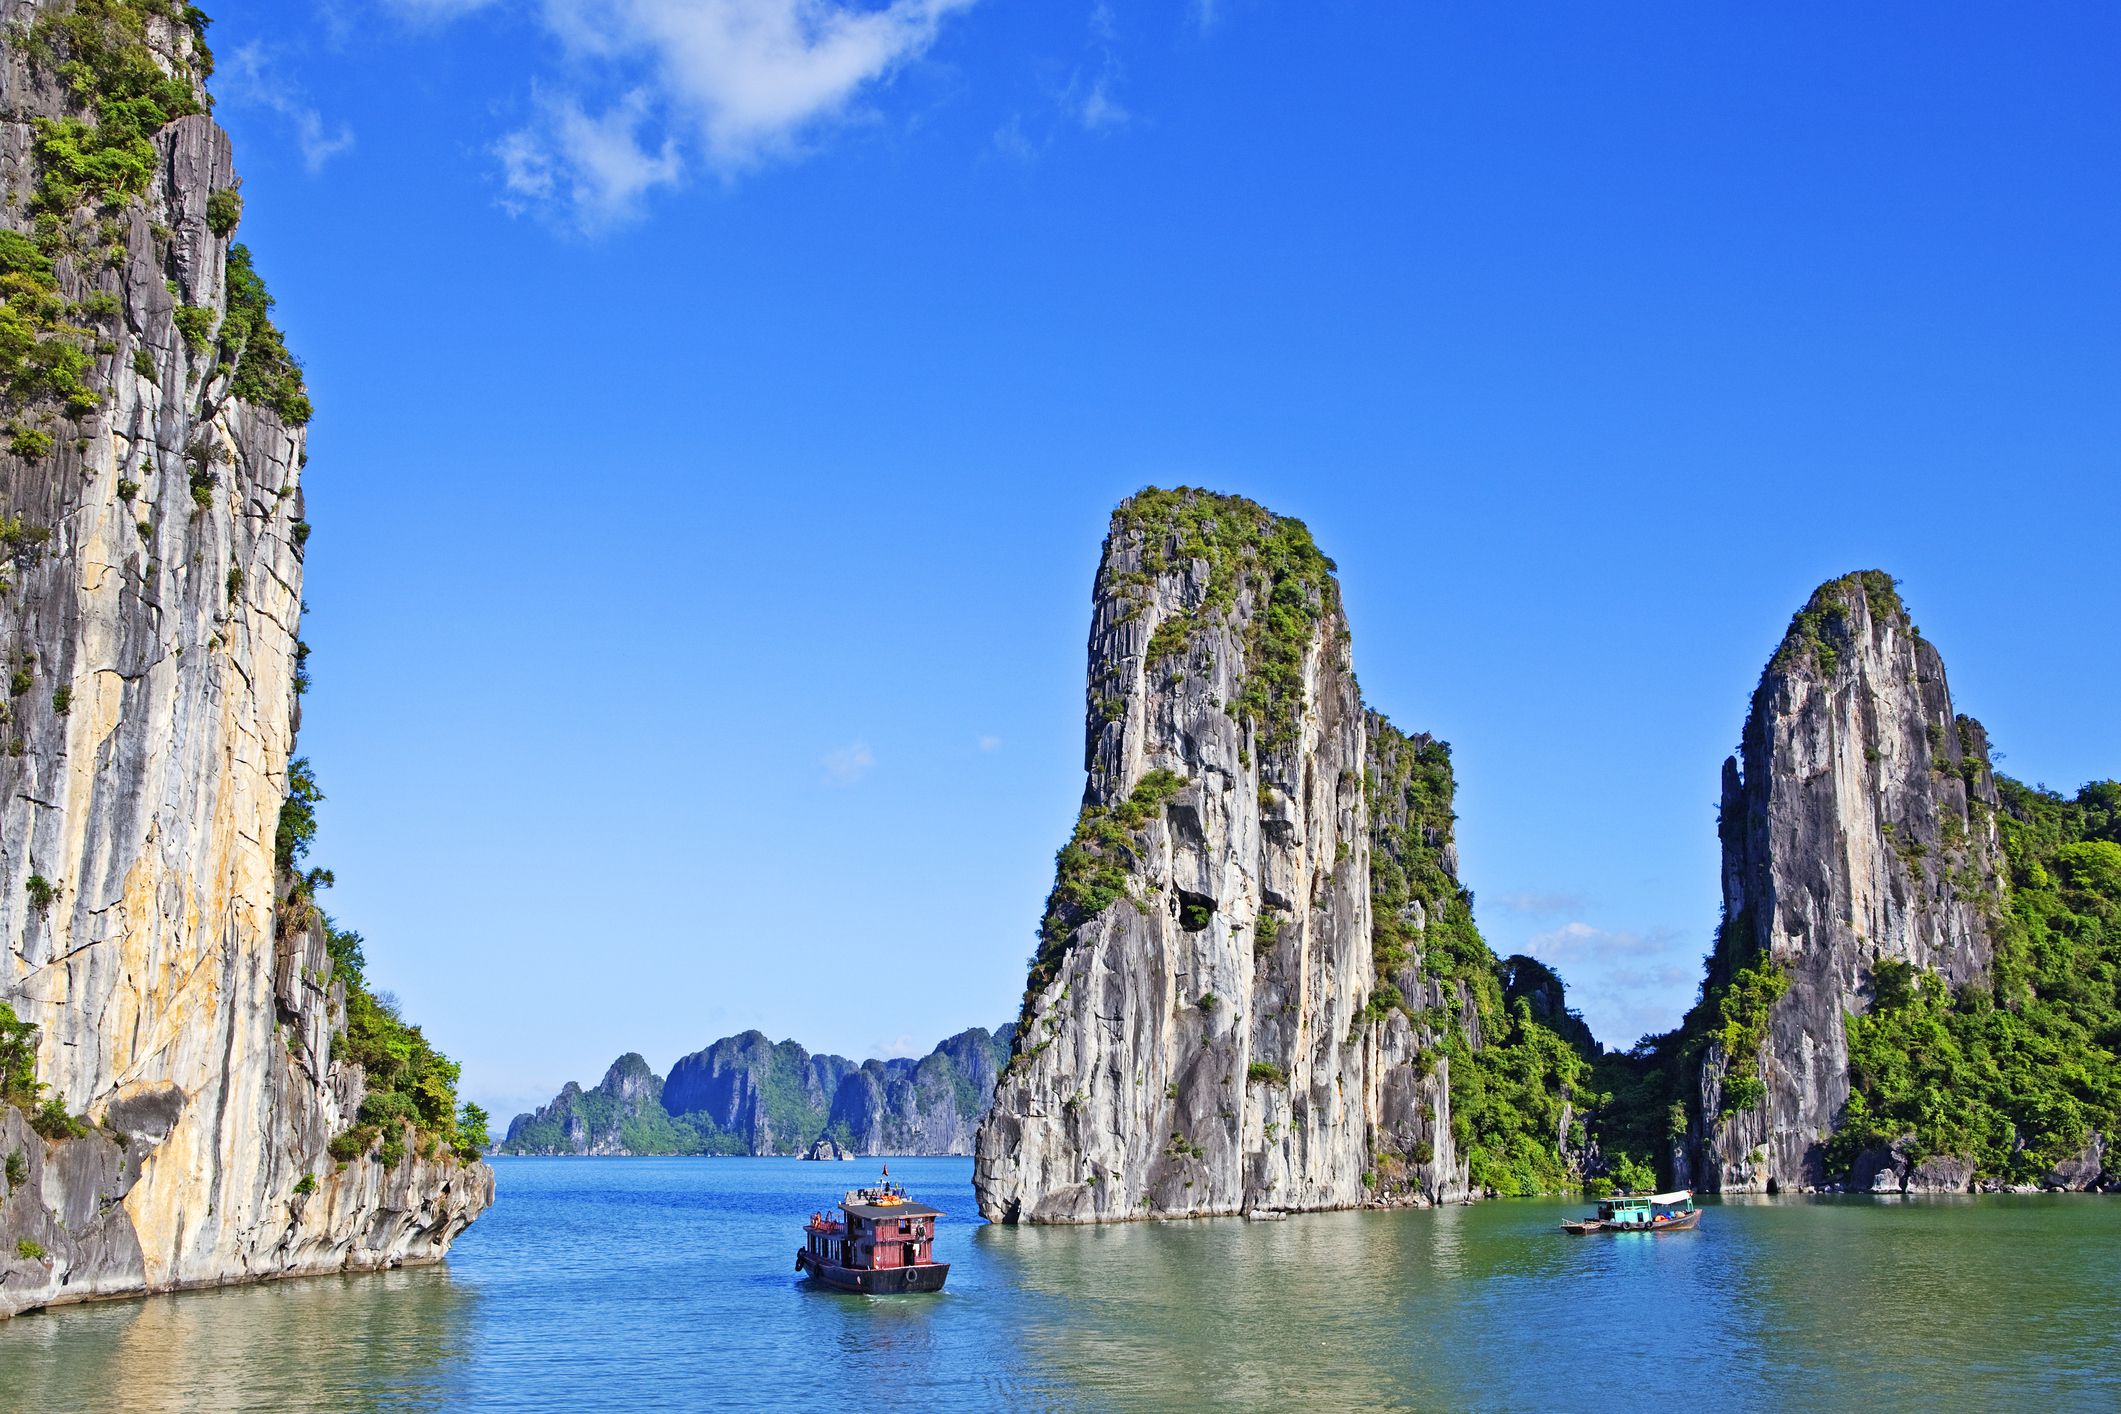 Let us take you on an unforgettable journey through this stunning UNESCO heritage site in Vietnam